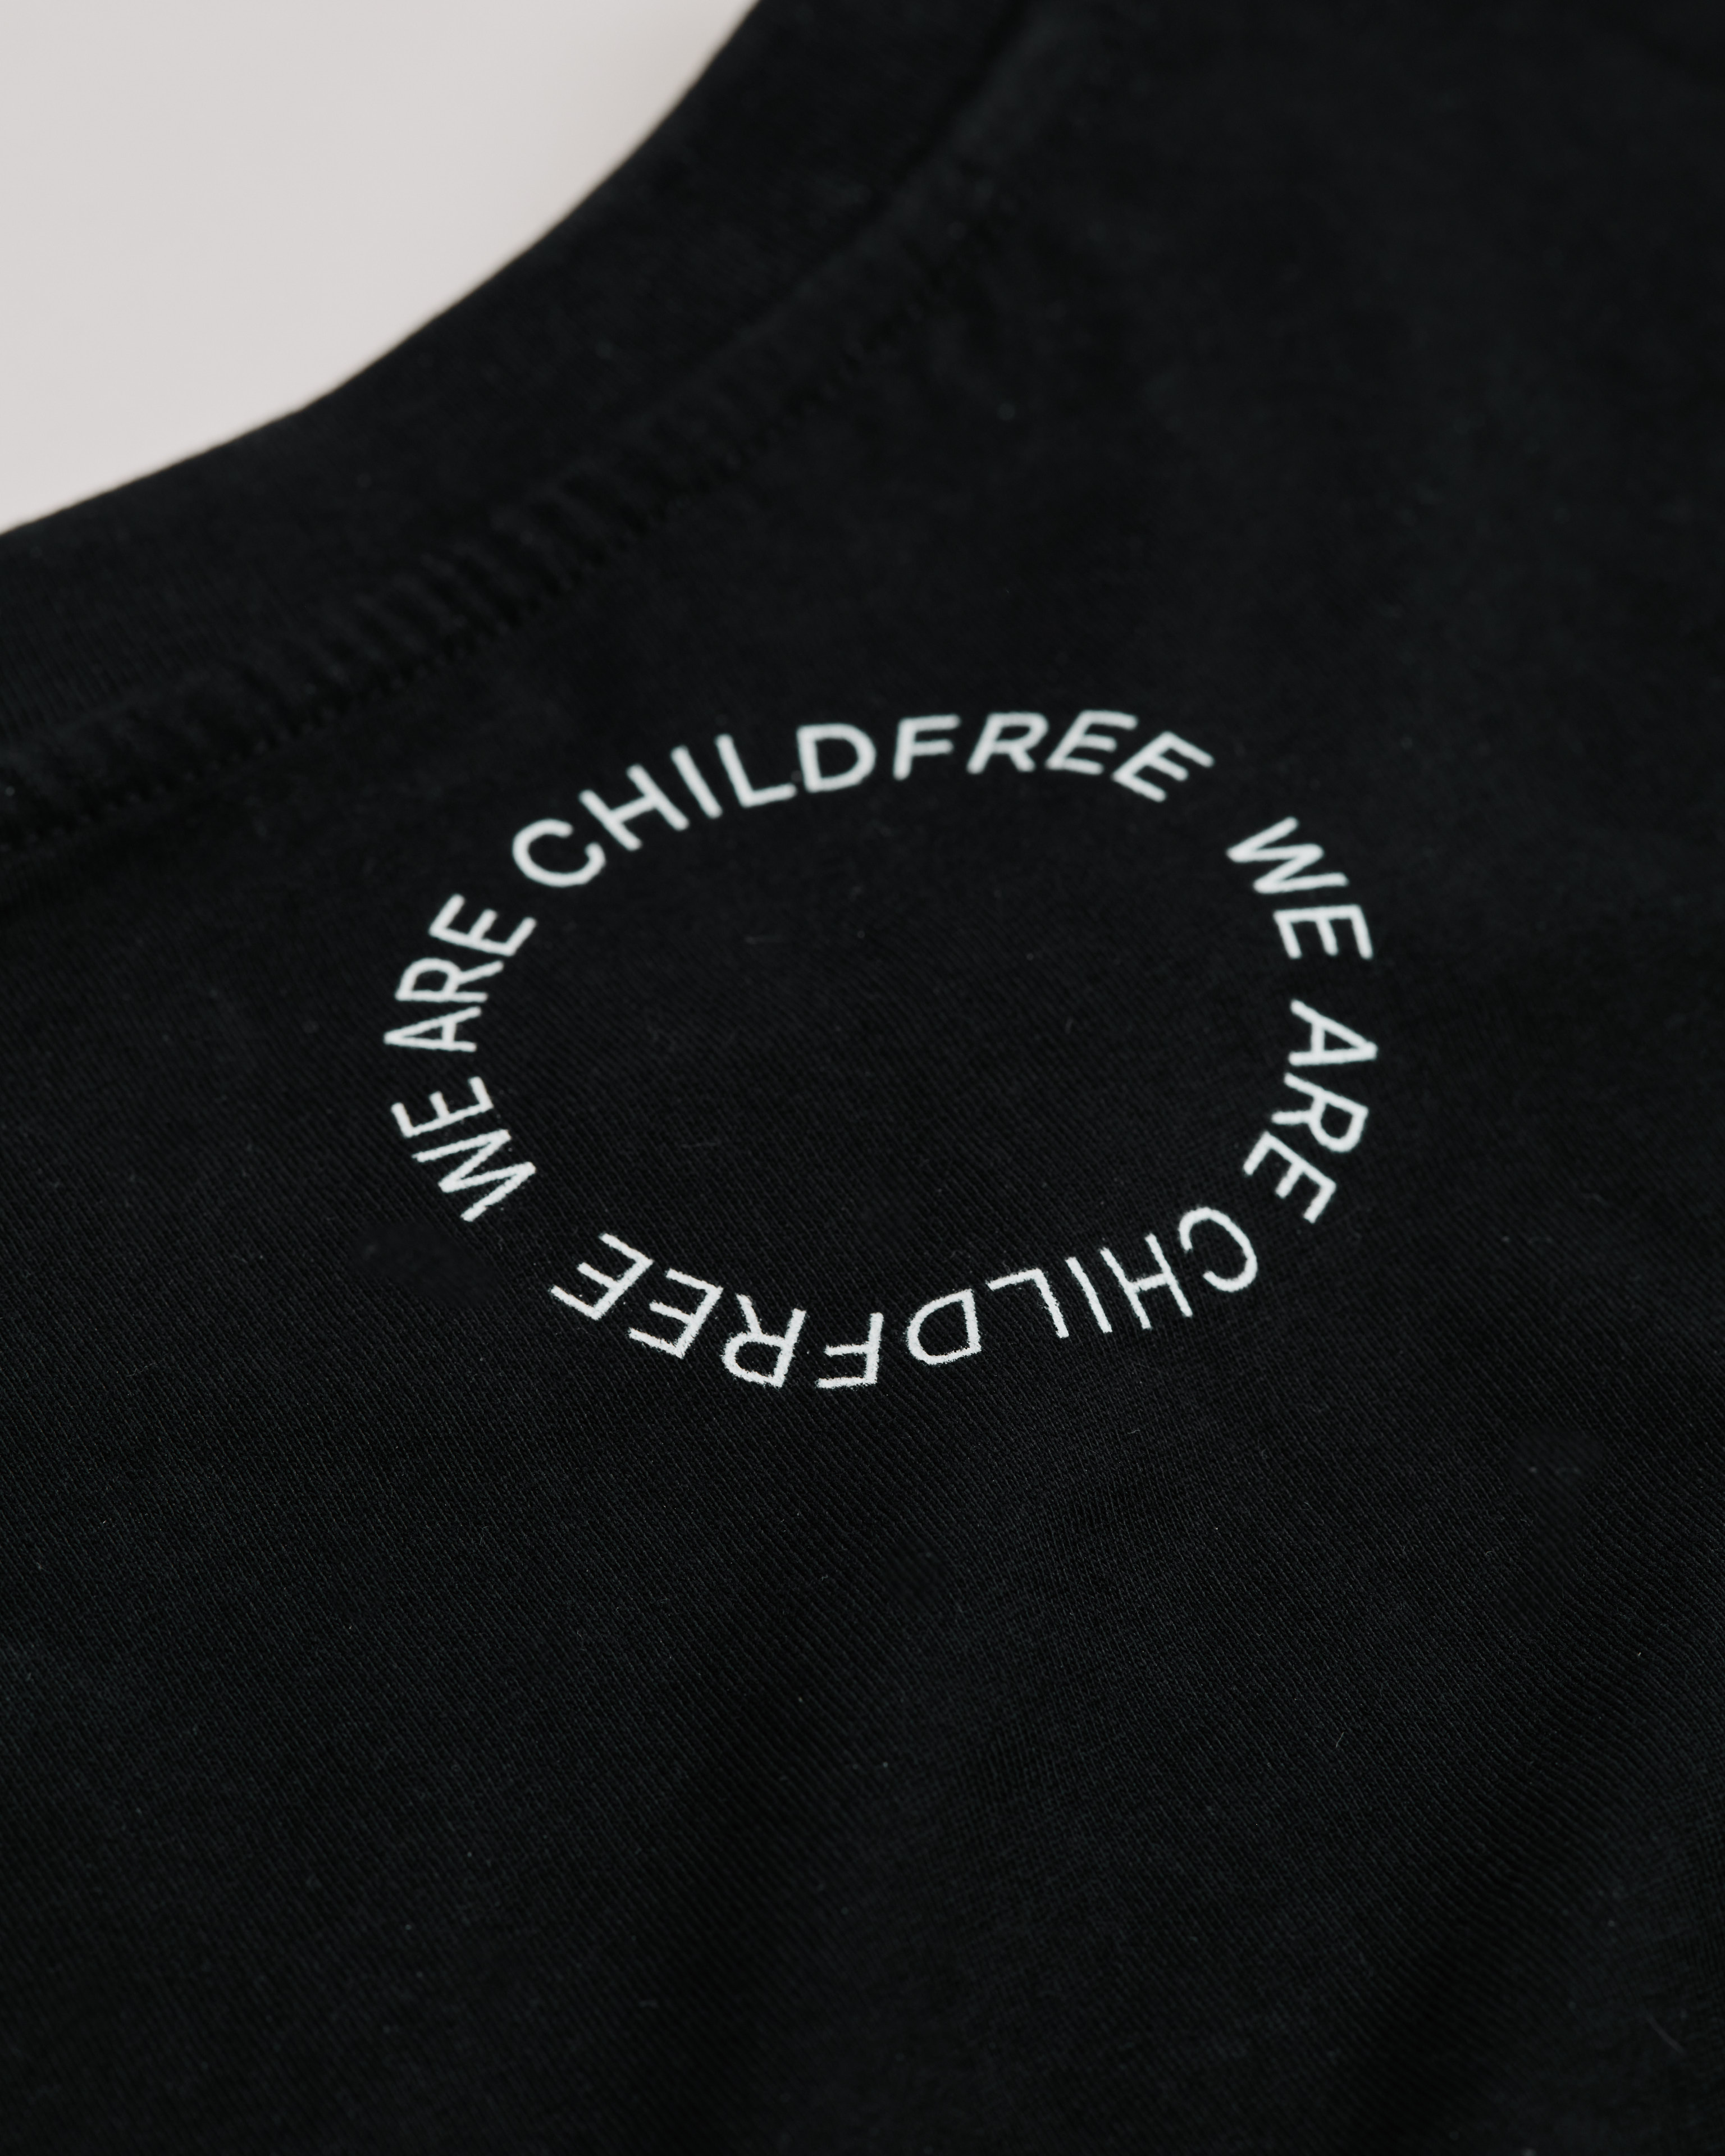 Close-up black We are Childfree t-shirt back detail